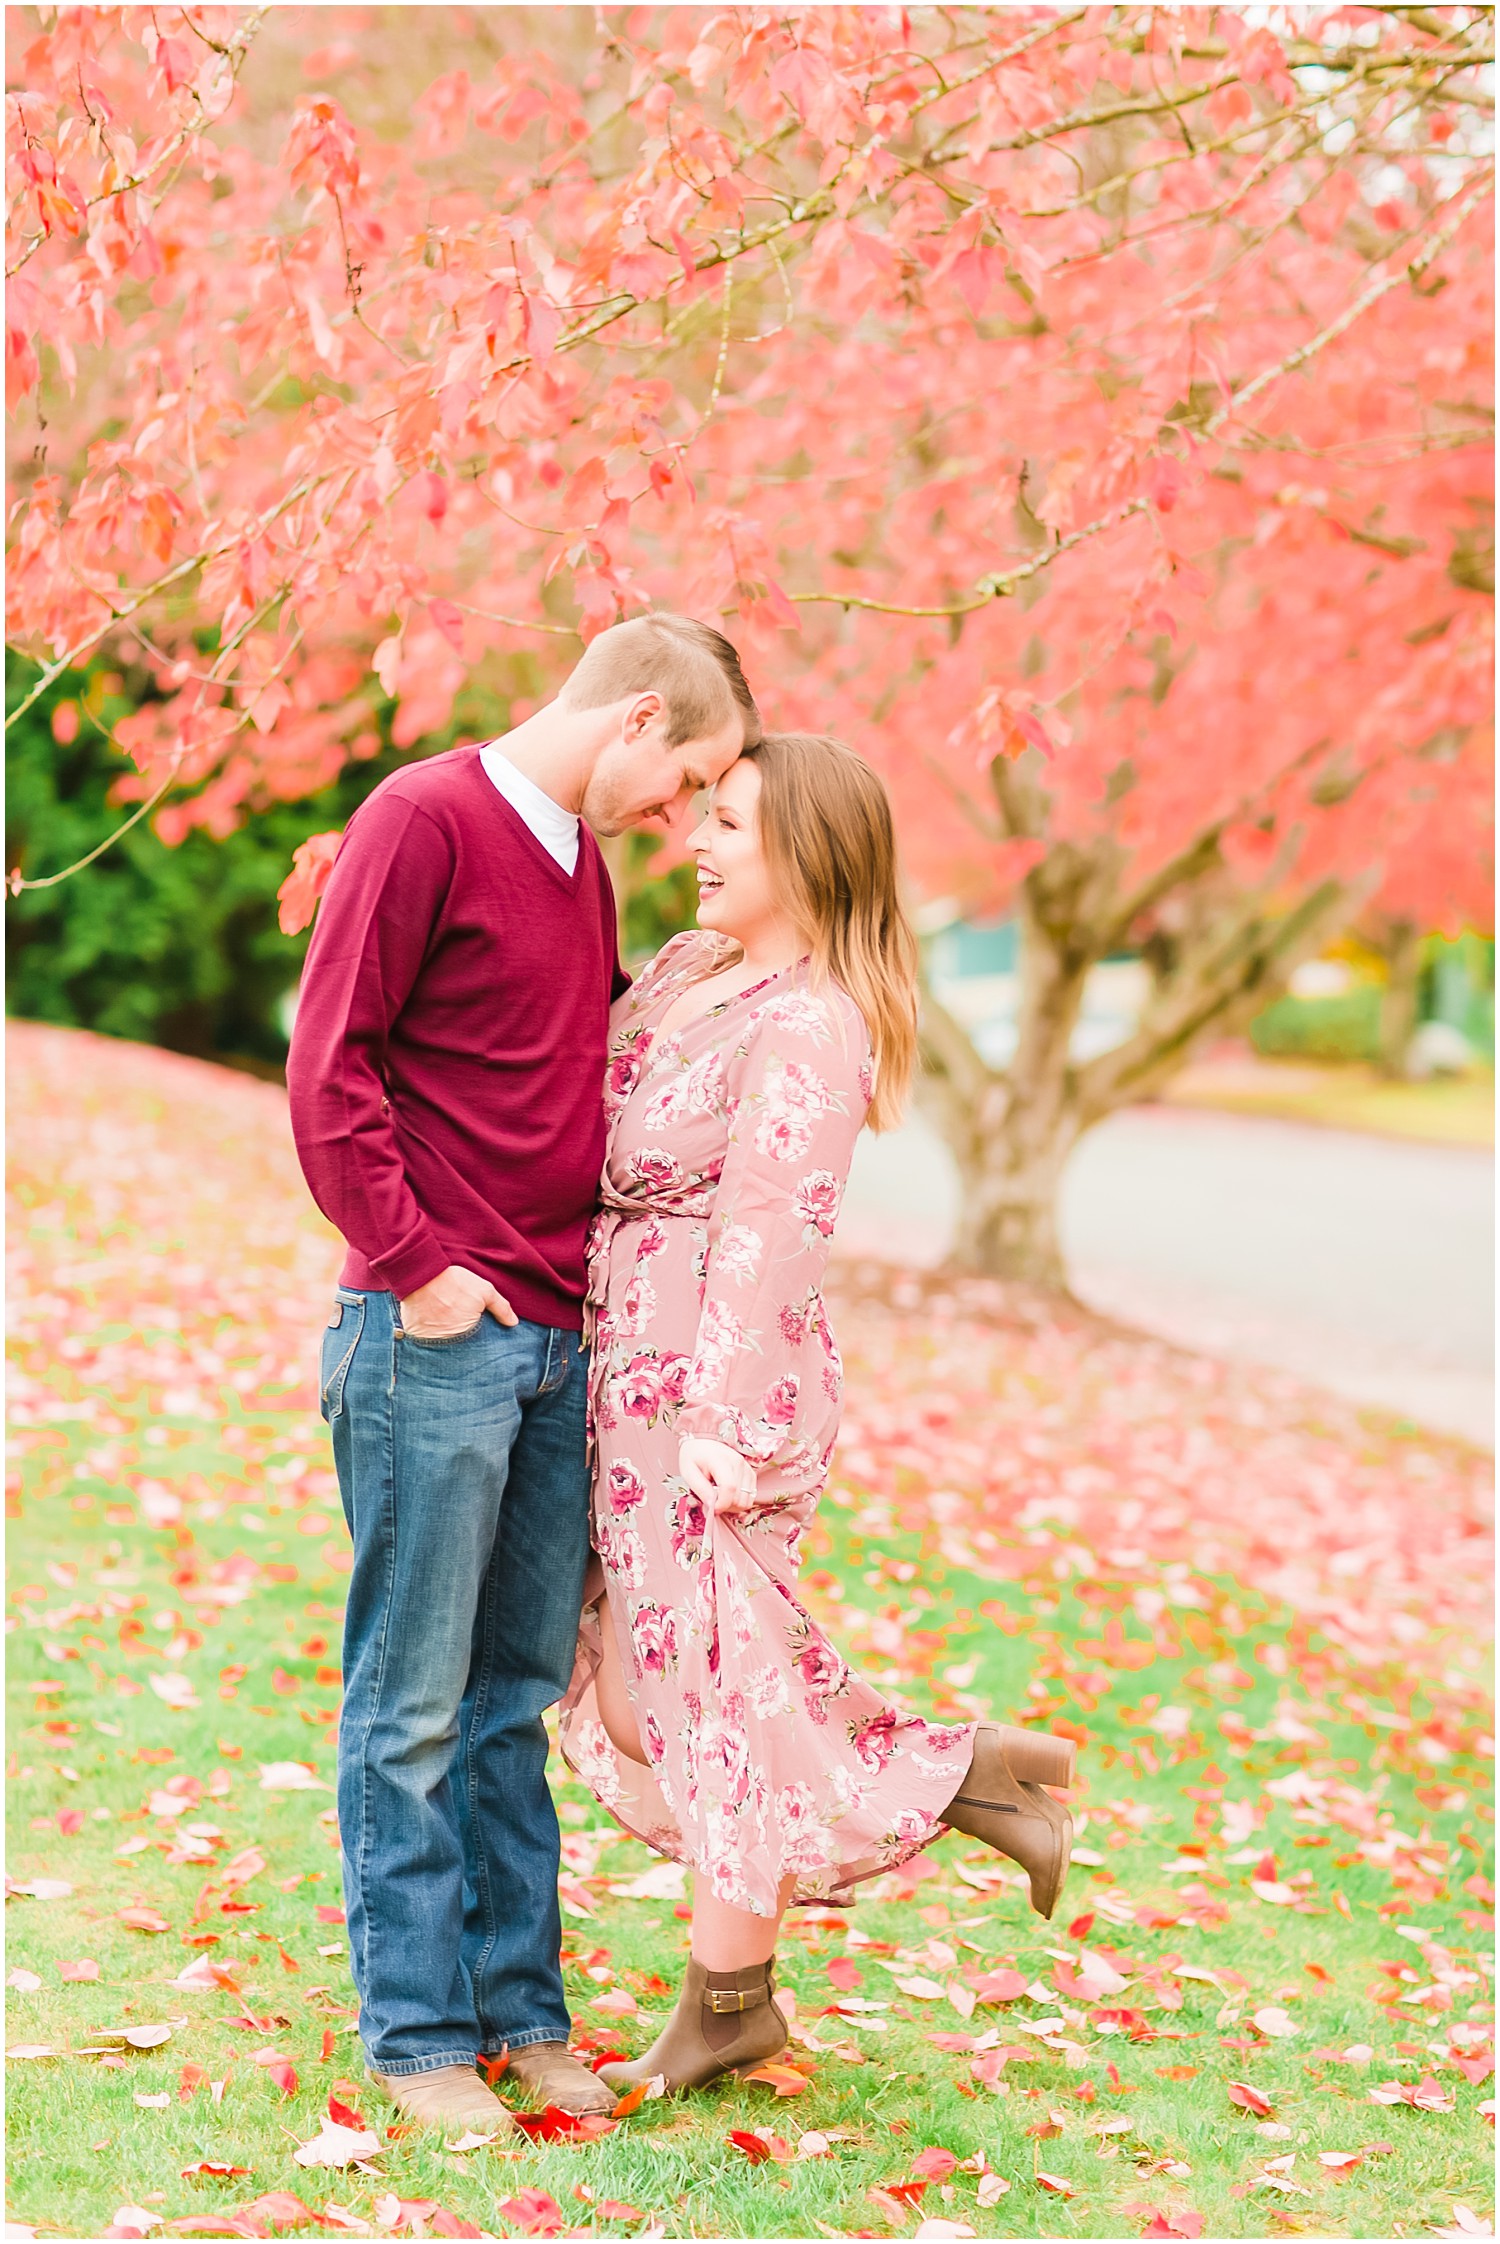 Autumn Bothell Landing Park Engagement | Nic & Brittany